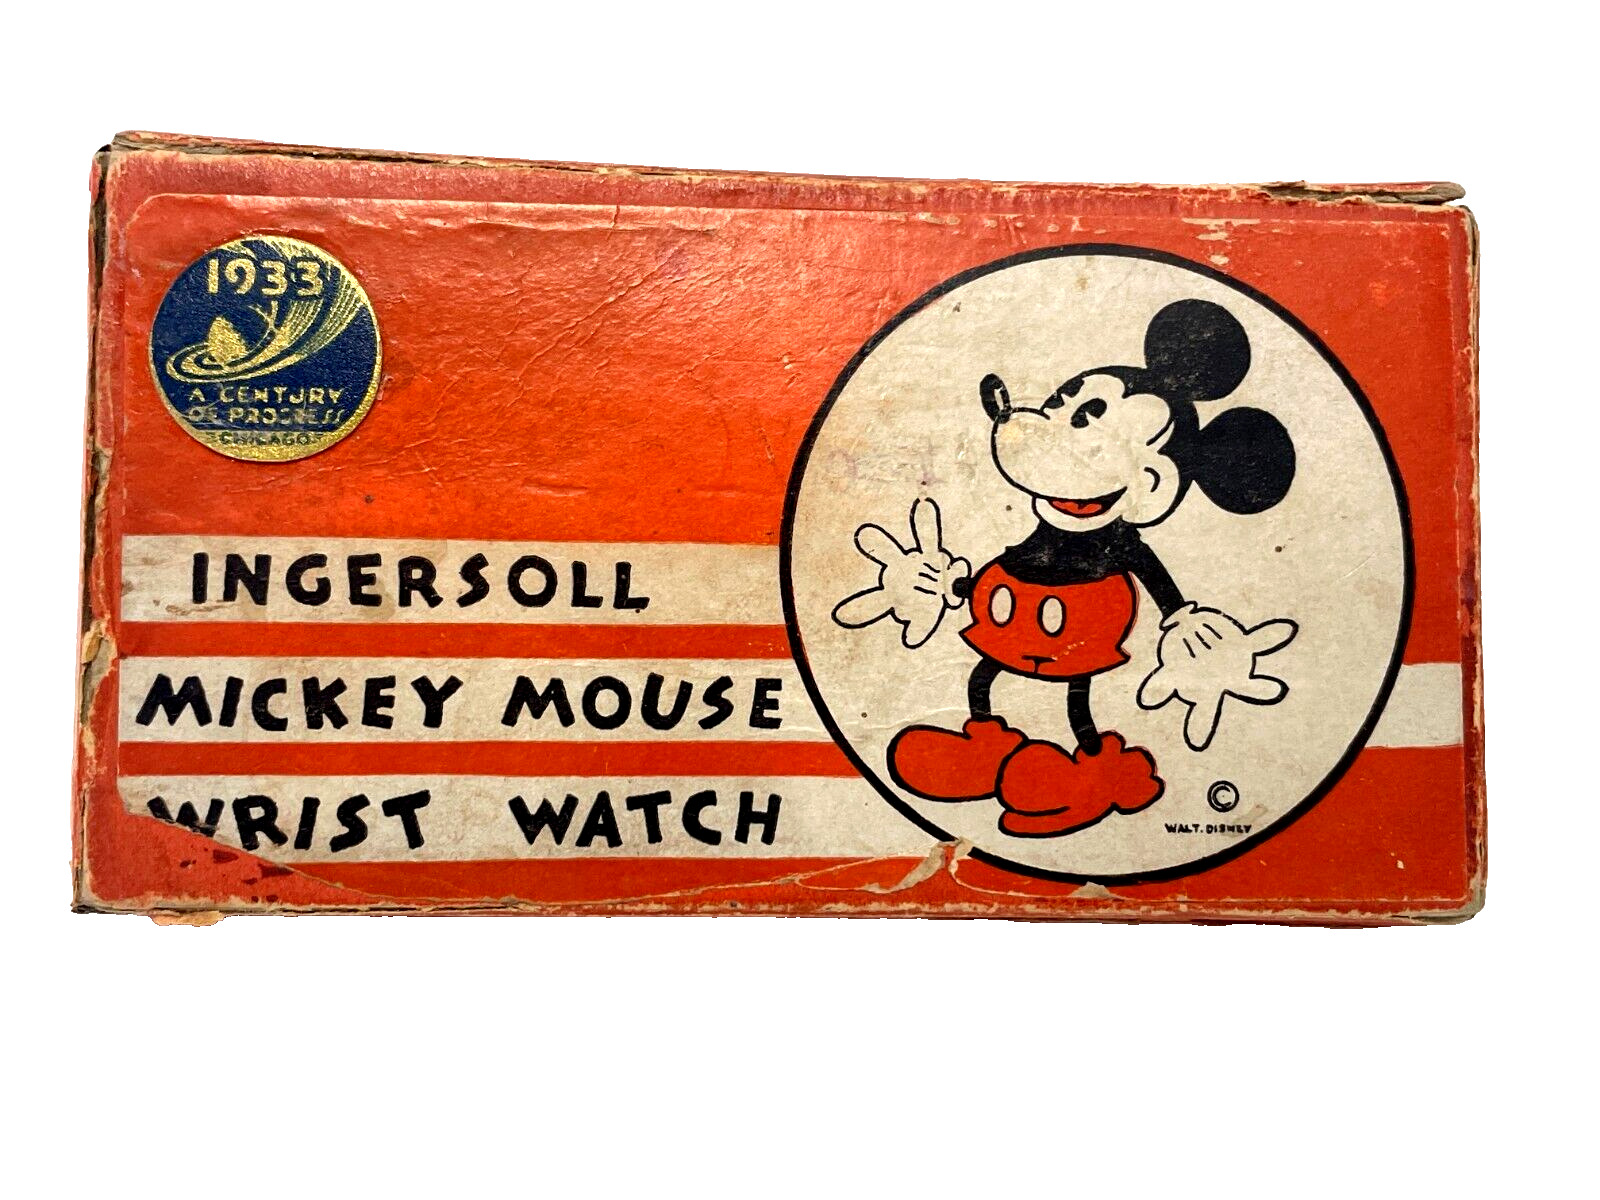 EXTREMELY RARE 1933 WORLD'S FAIR Ingersoll mickey mouse disney watch WITH BOX